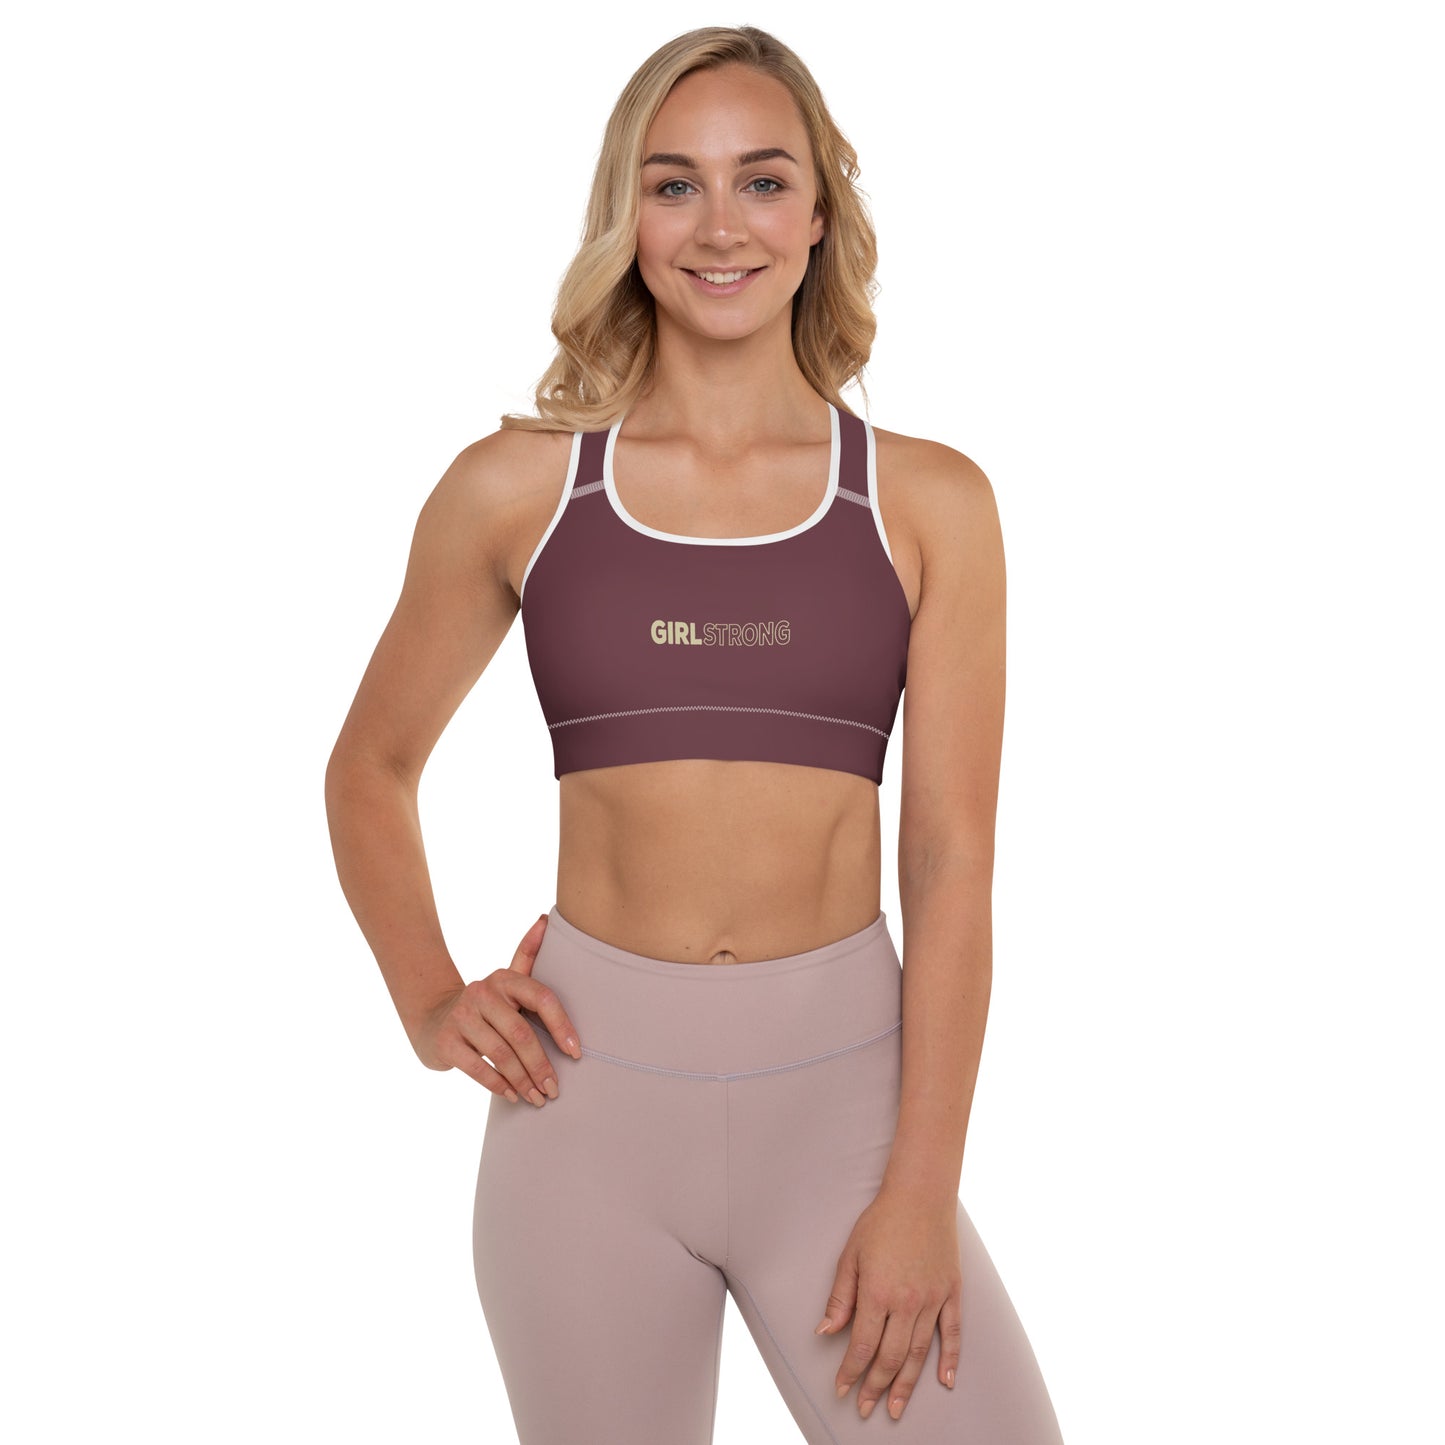 ELEVATED ESSENTIALS, THE PERFECT PADDED SPORTS BRA FLORIDA